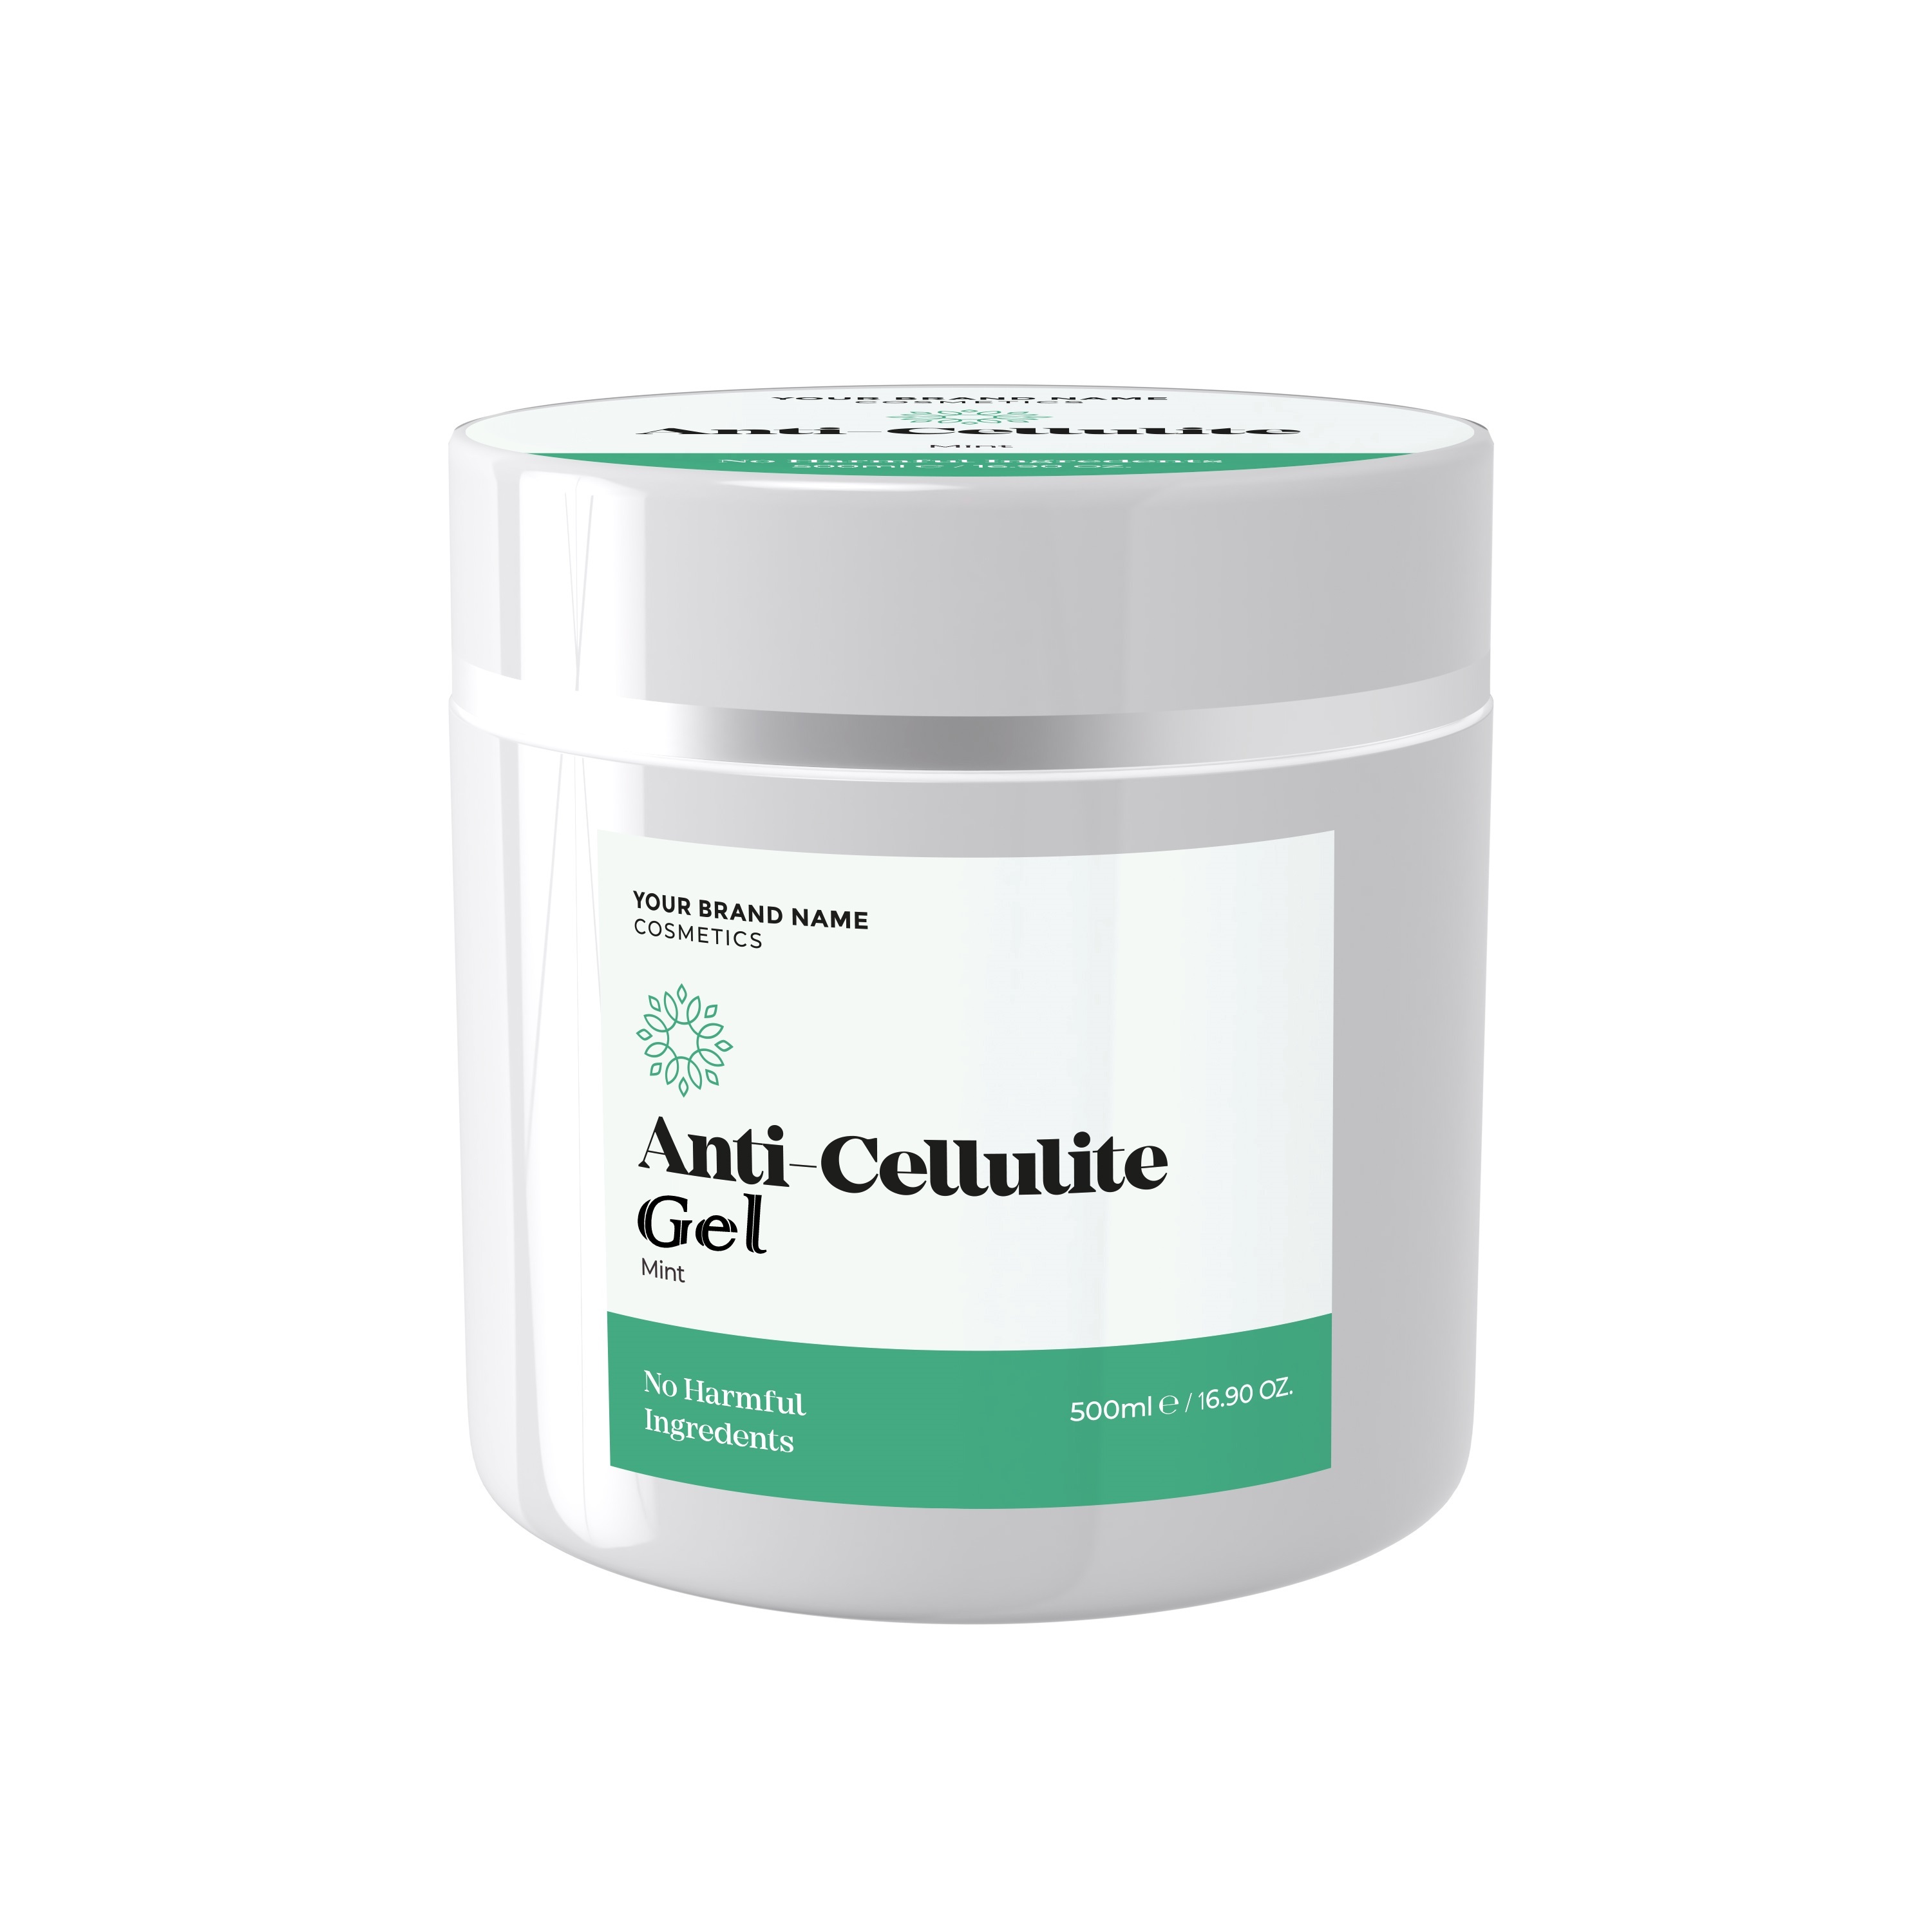 Anti Cellulite Gel Mint 500ml Made By Nature Labs Private Label Natural Cosmetics And Skin Care Products Made In Europe